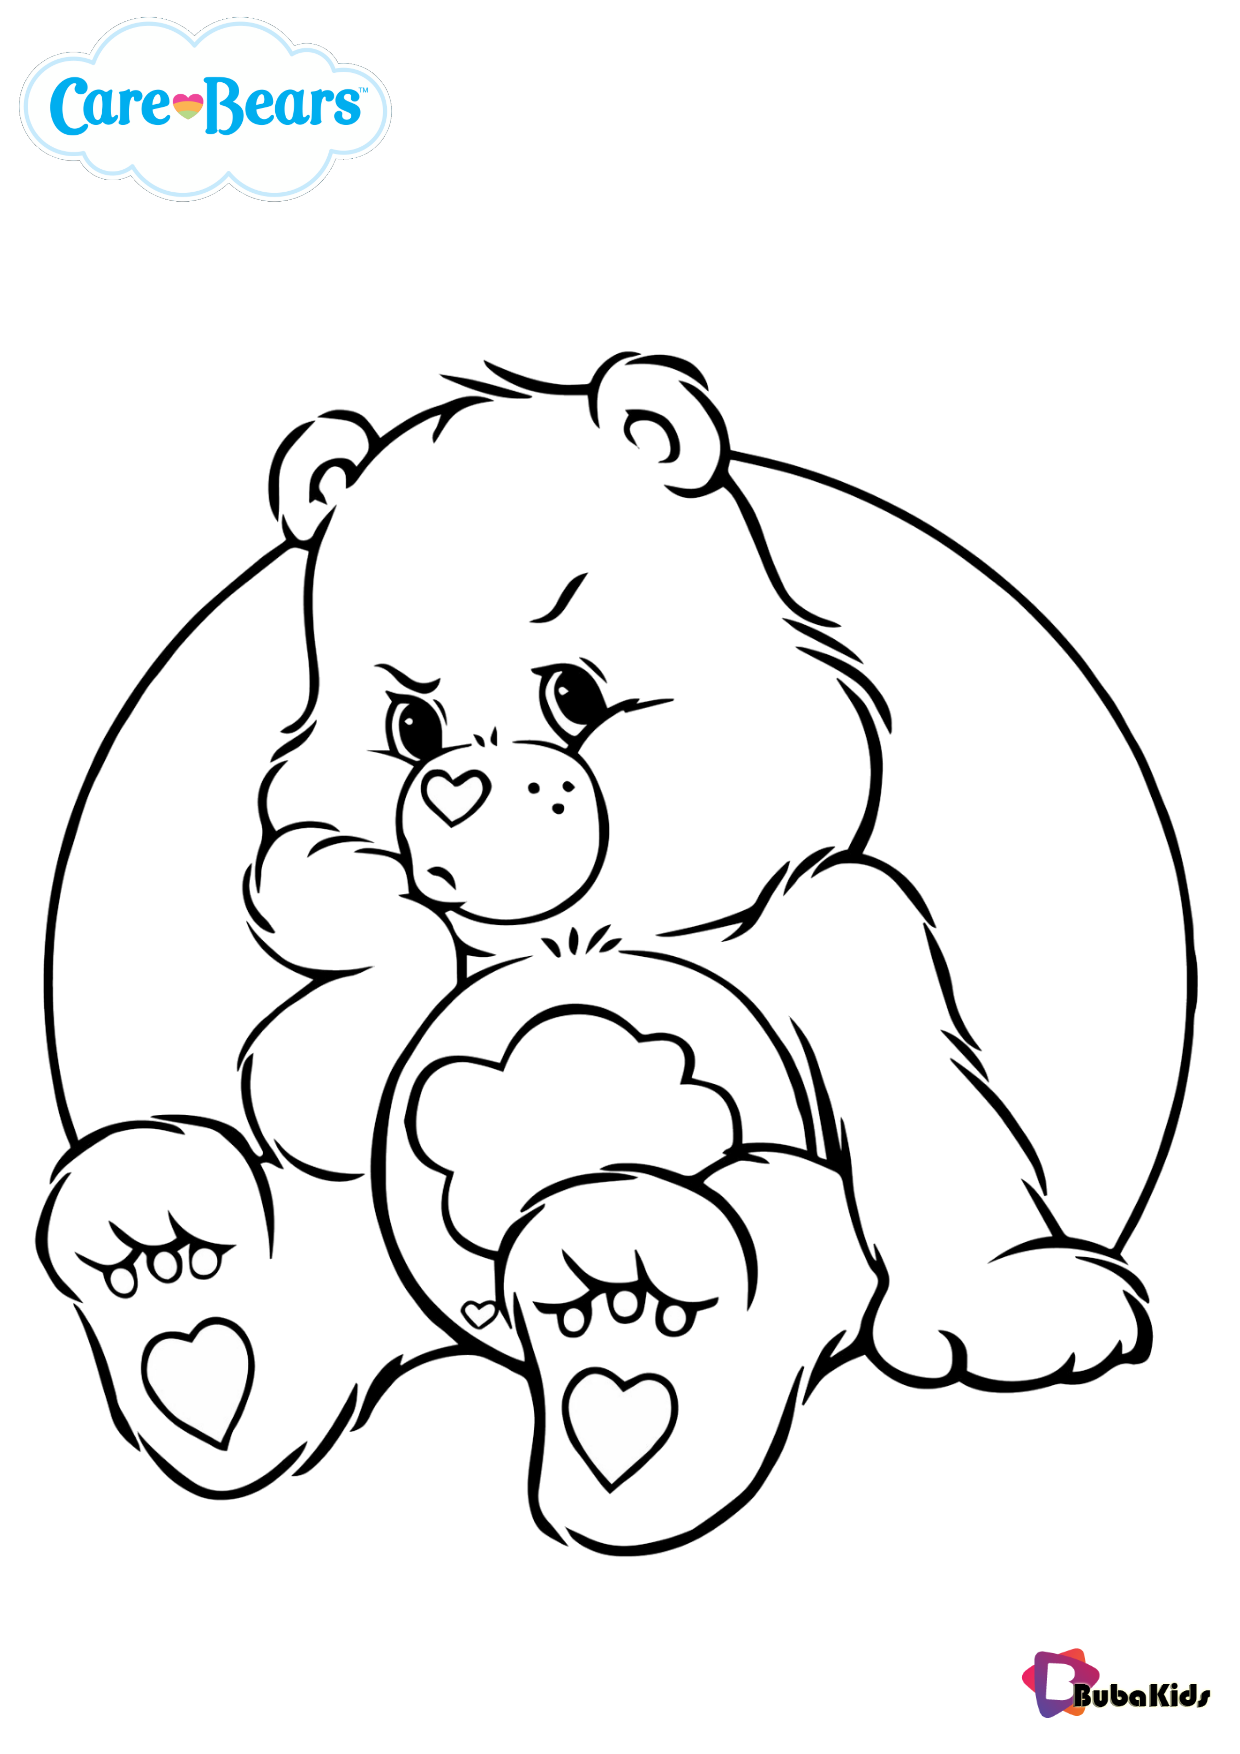 Care Bears Grumpy bear coloring pages